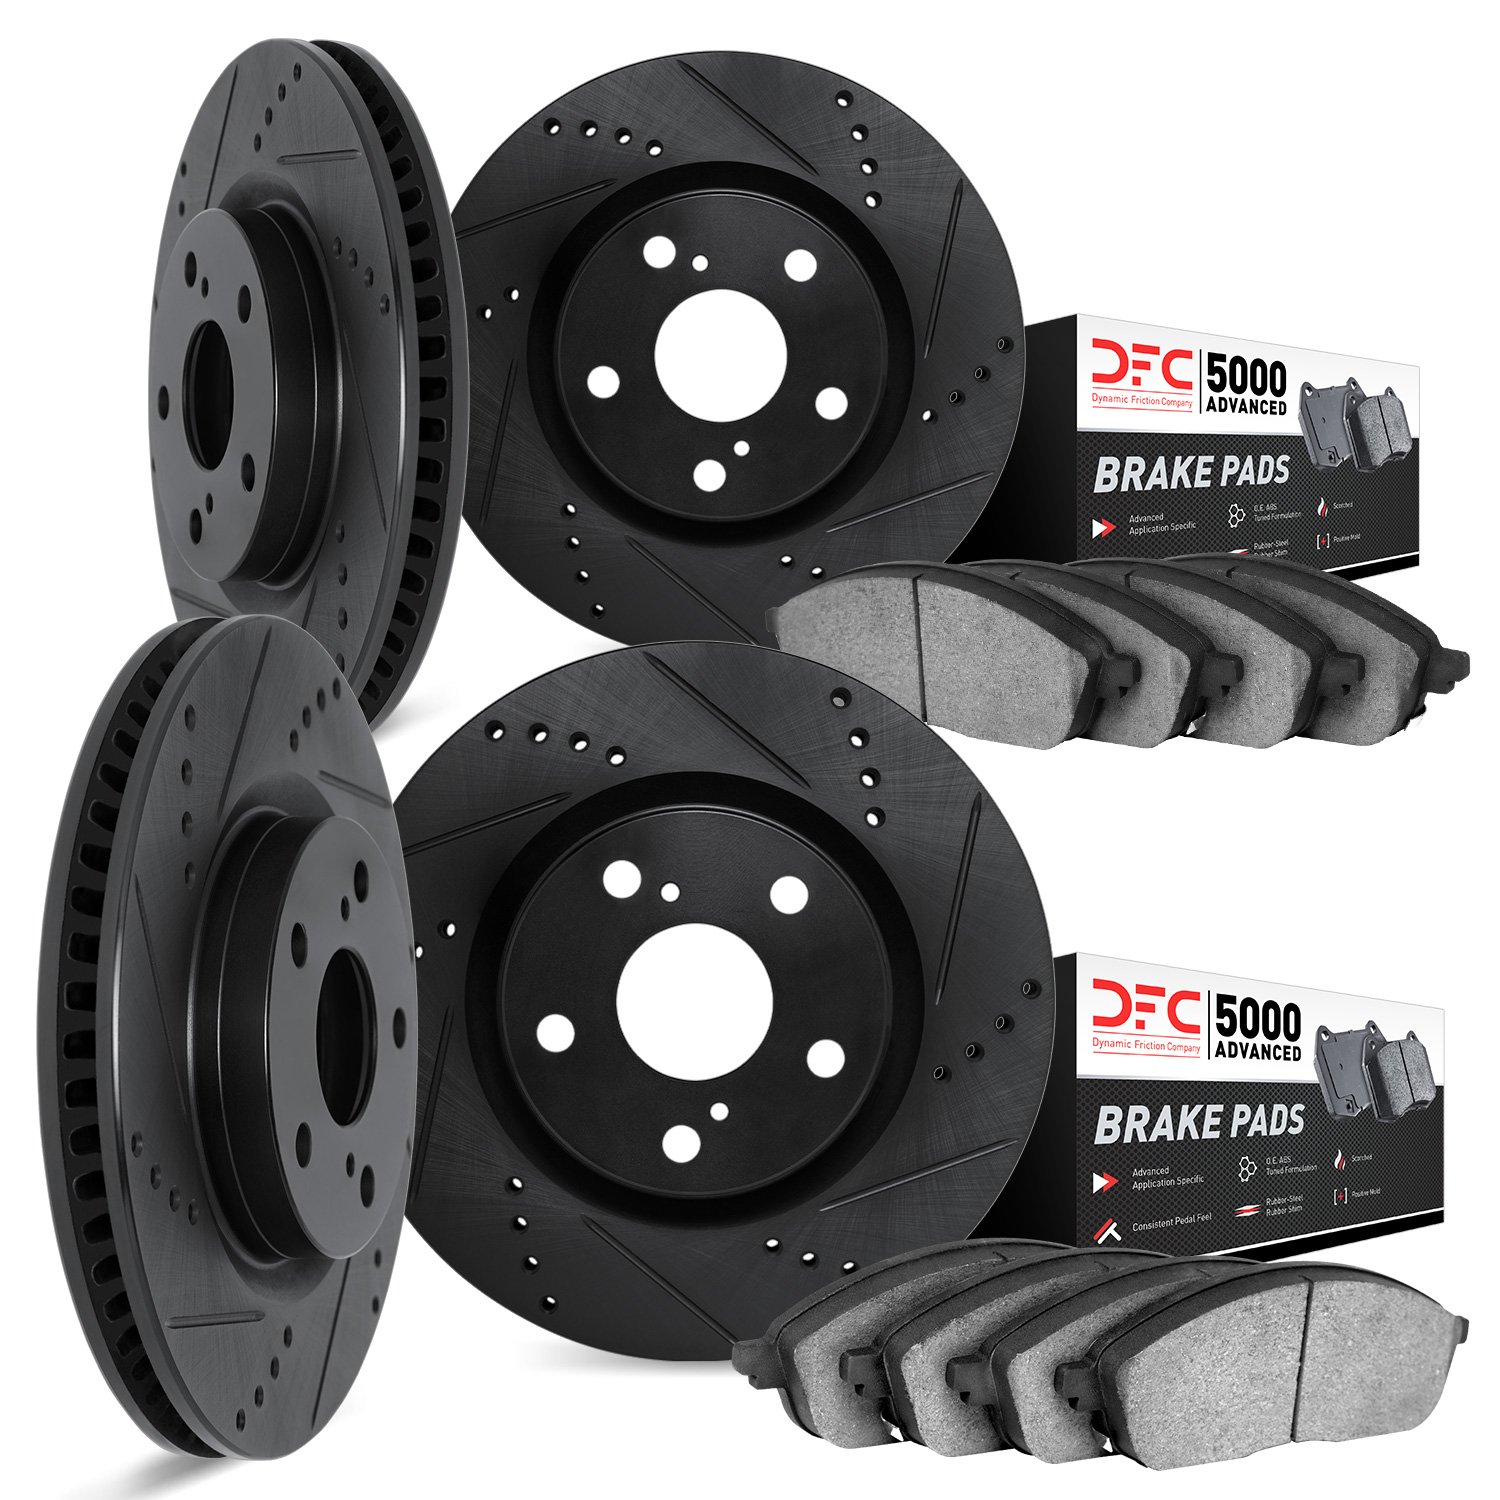 8504-72041 Drilled/Slotted Brake Rotors w/5000 Advanced Brake Pads Kit [Black], 1992-1996 Mitsubishi, Position: Front and Rear